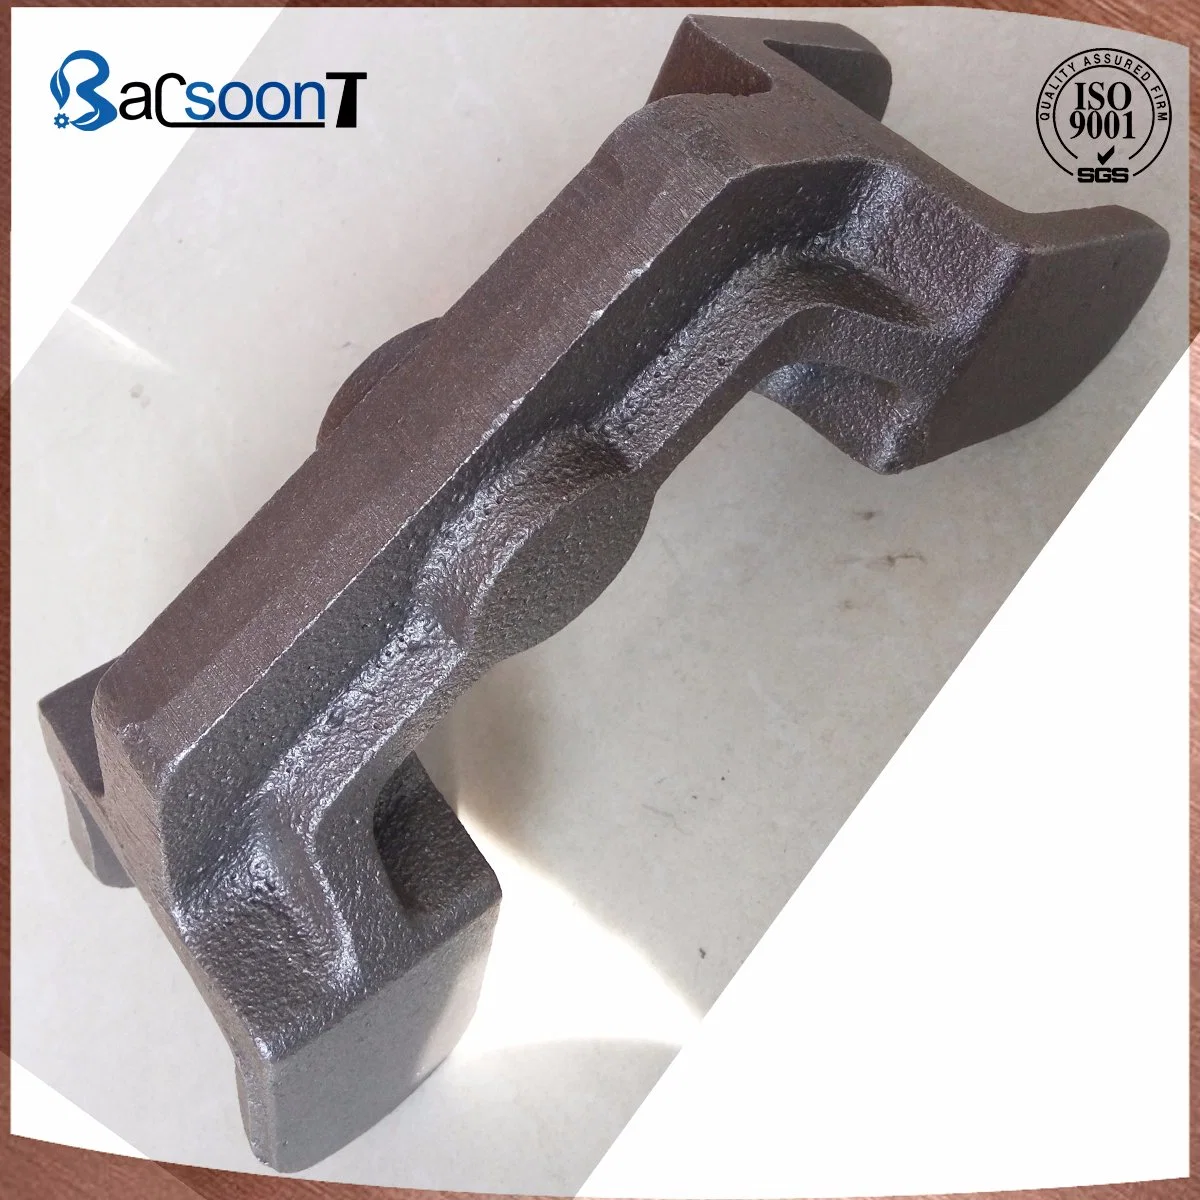 Lost Wax Casting Steel Engineering Machinery Part Construction Machinery Part